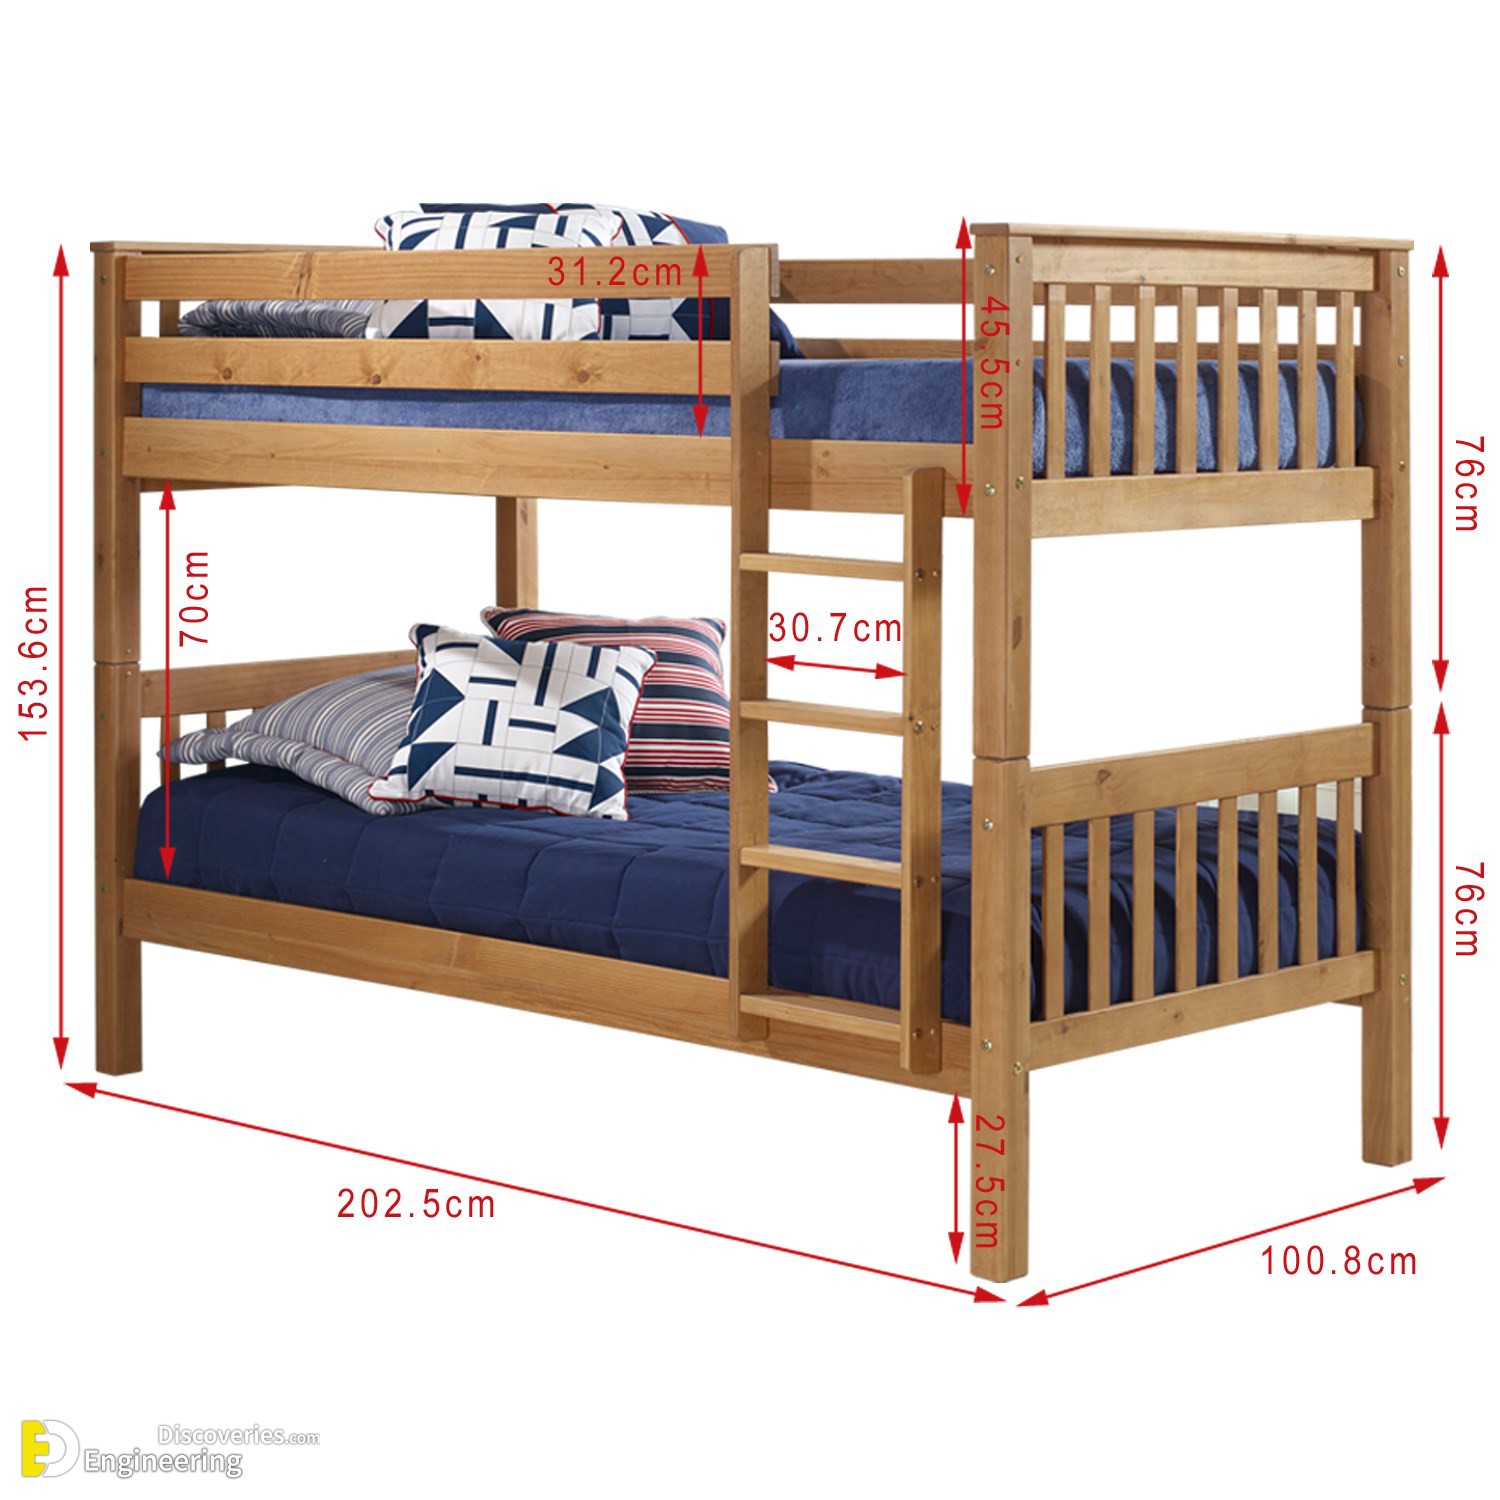 What S The Size Of A Bunk Bed Guide To, Bunk Bed Measurements In Cm